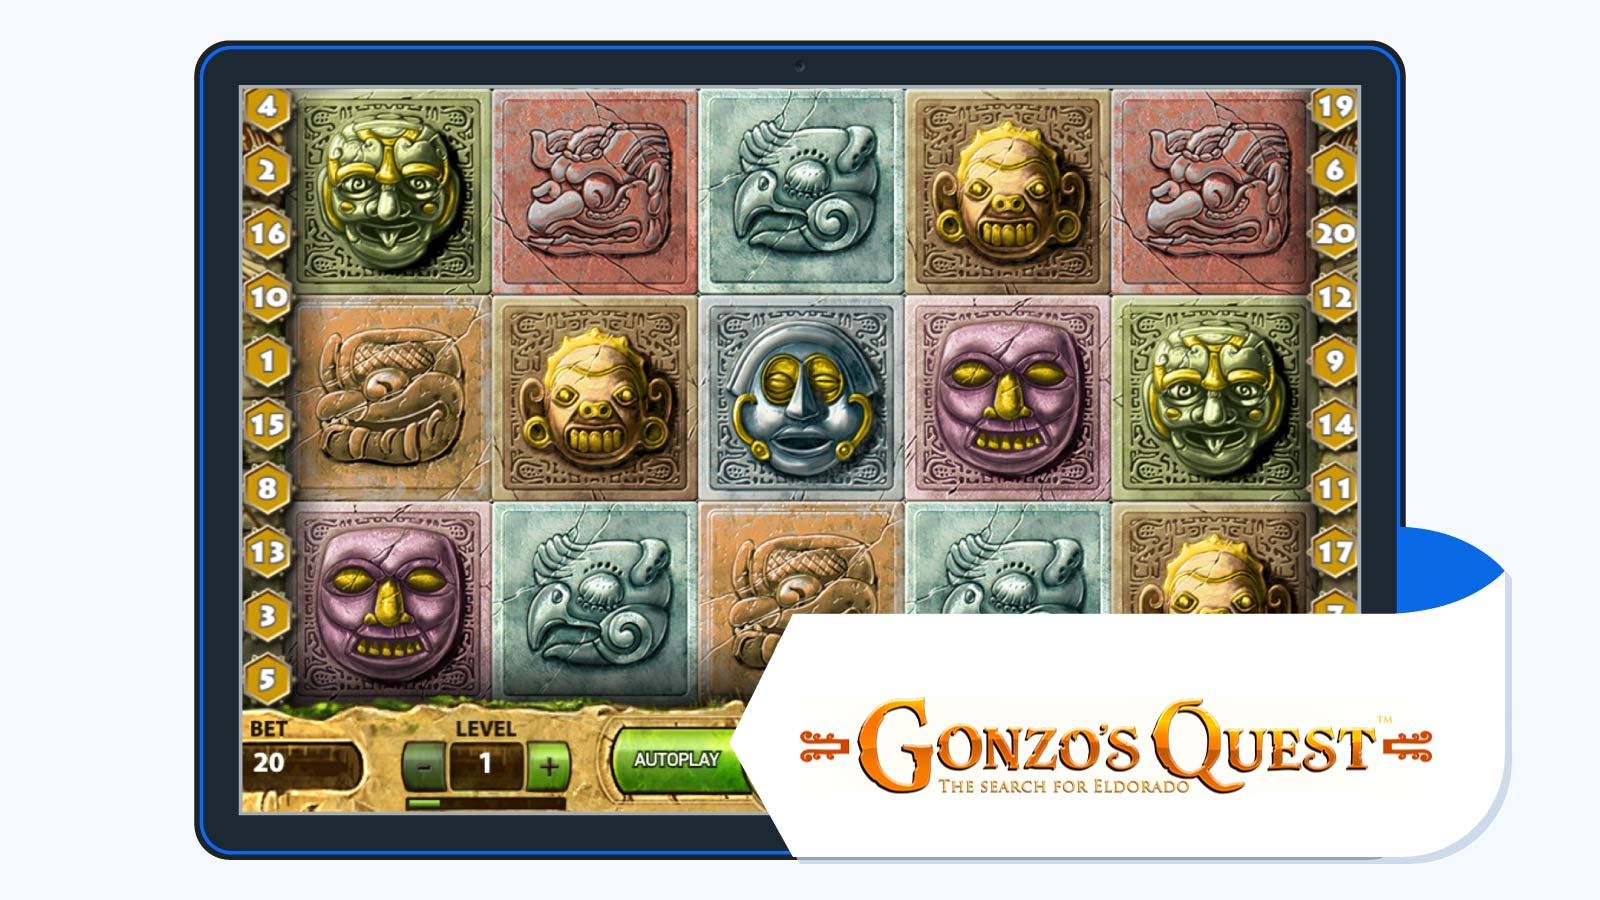 Gonzo's-Quest-Online-Casino-Game-Review